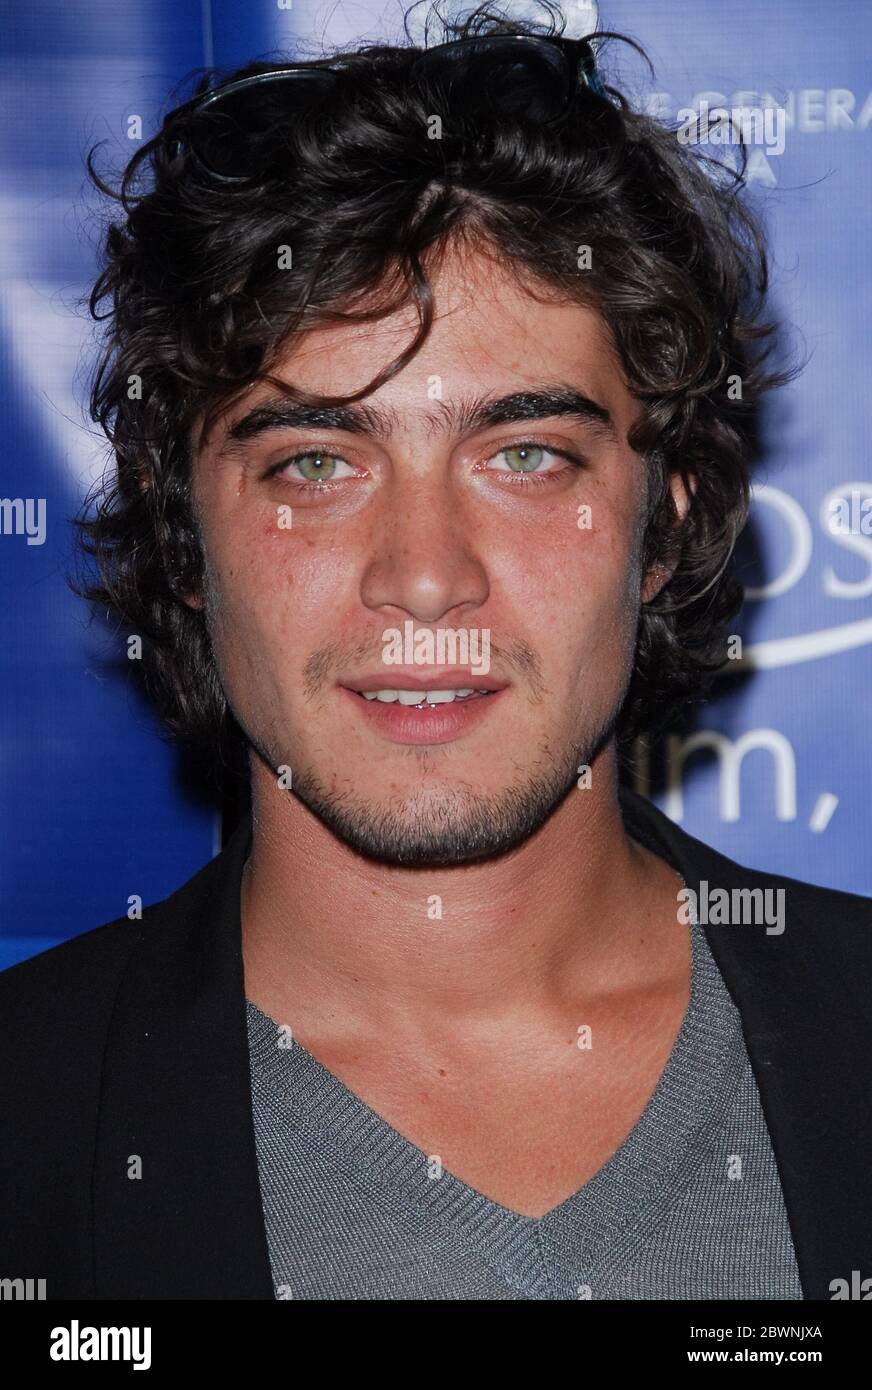 Riccardo Scamarcio at the 'Los Angeles, Italia' FIlm Festival Presents the Los Angeles Premiere of 'All The Invisible Children held at the Mann Chinese 6 Theatres in Hollywood, CA. The event took place on Monday, February 19, 2007. Photo by: SBM / PictureLux- File Reference # 34006-3198SBMPLX Stock Photo